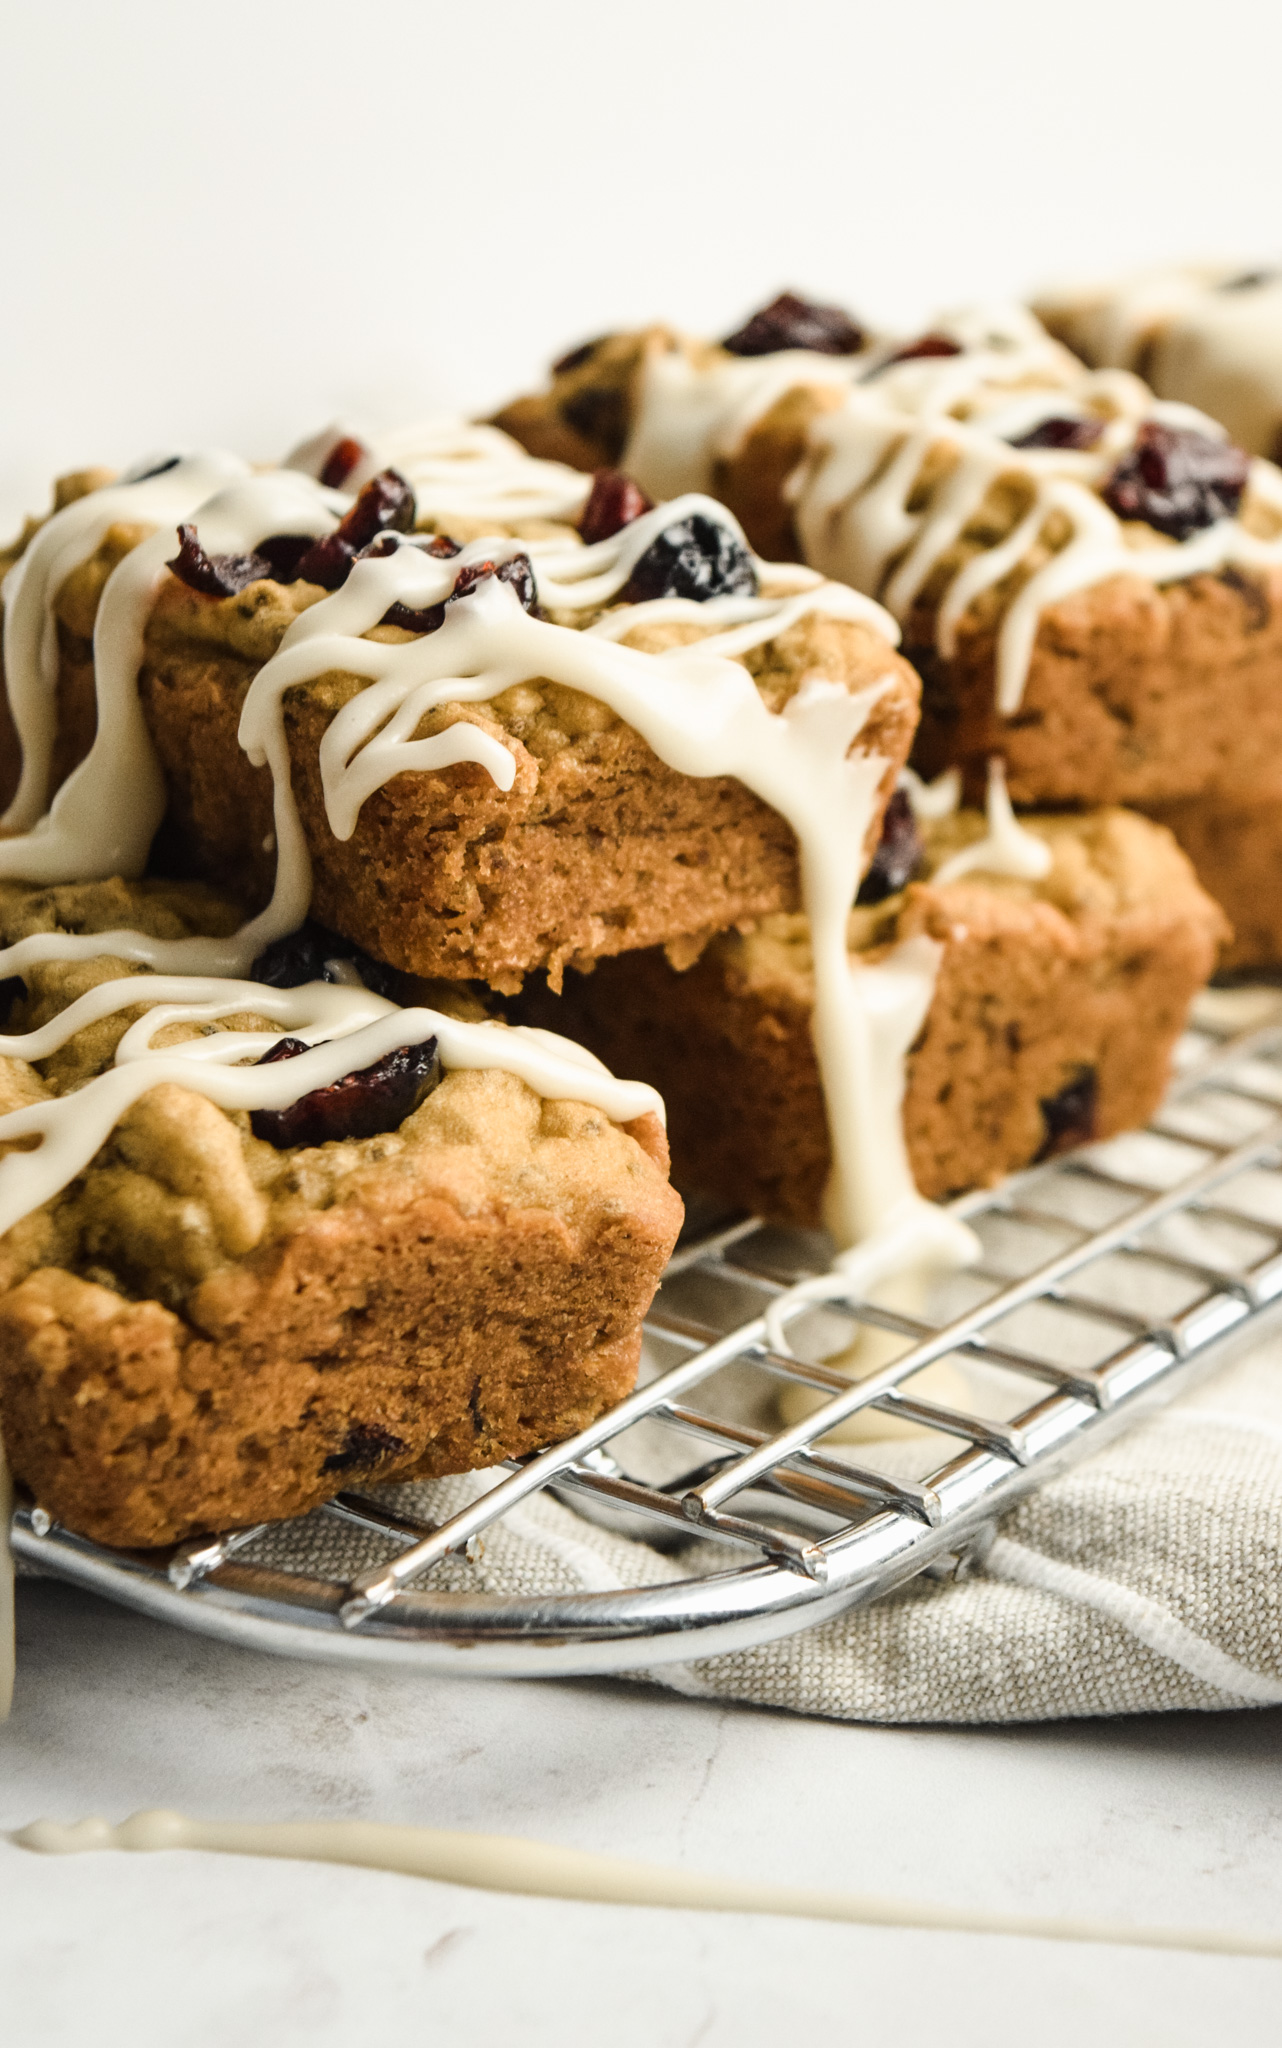 Mini Gluten Free Cranberry Orange Pound Cakes with Vanilla Drizzle on Cooling Rack